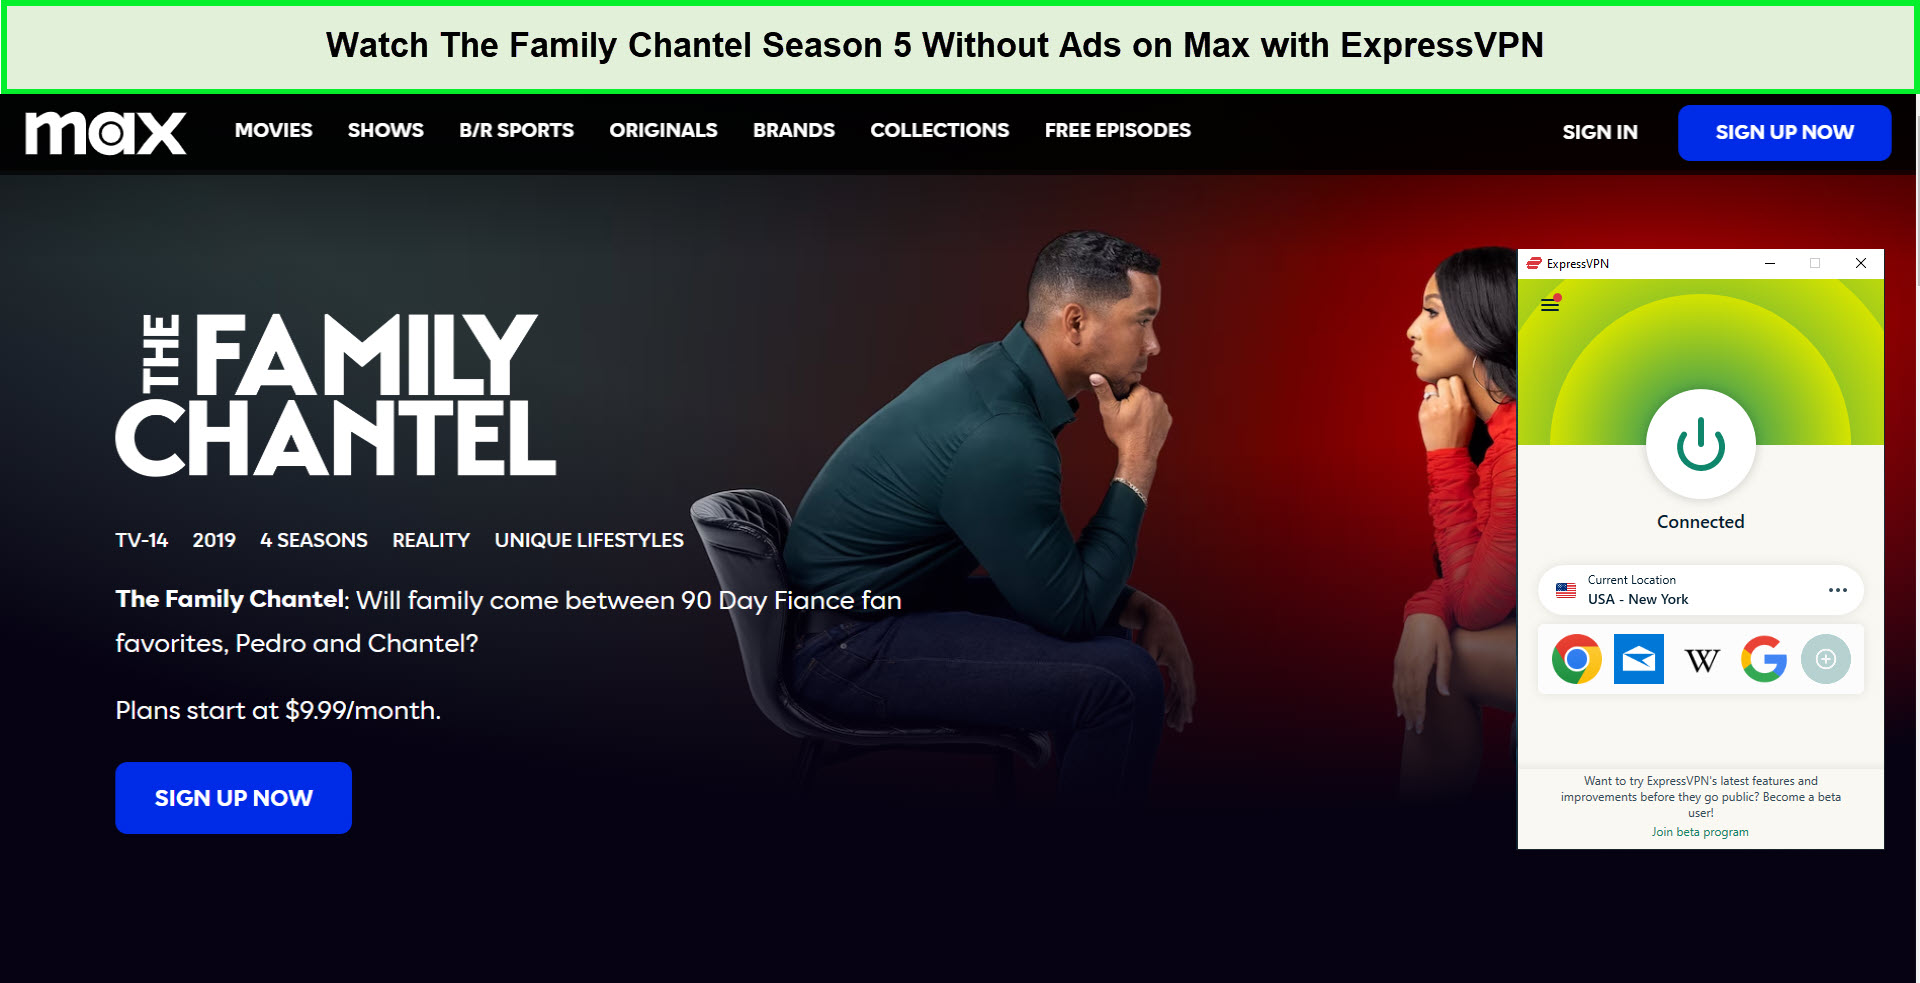 Watch-The-Family-Chantel-Season-5-Without-Ads-in-Spain-On-Max-with-ExpressPN